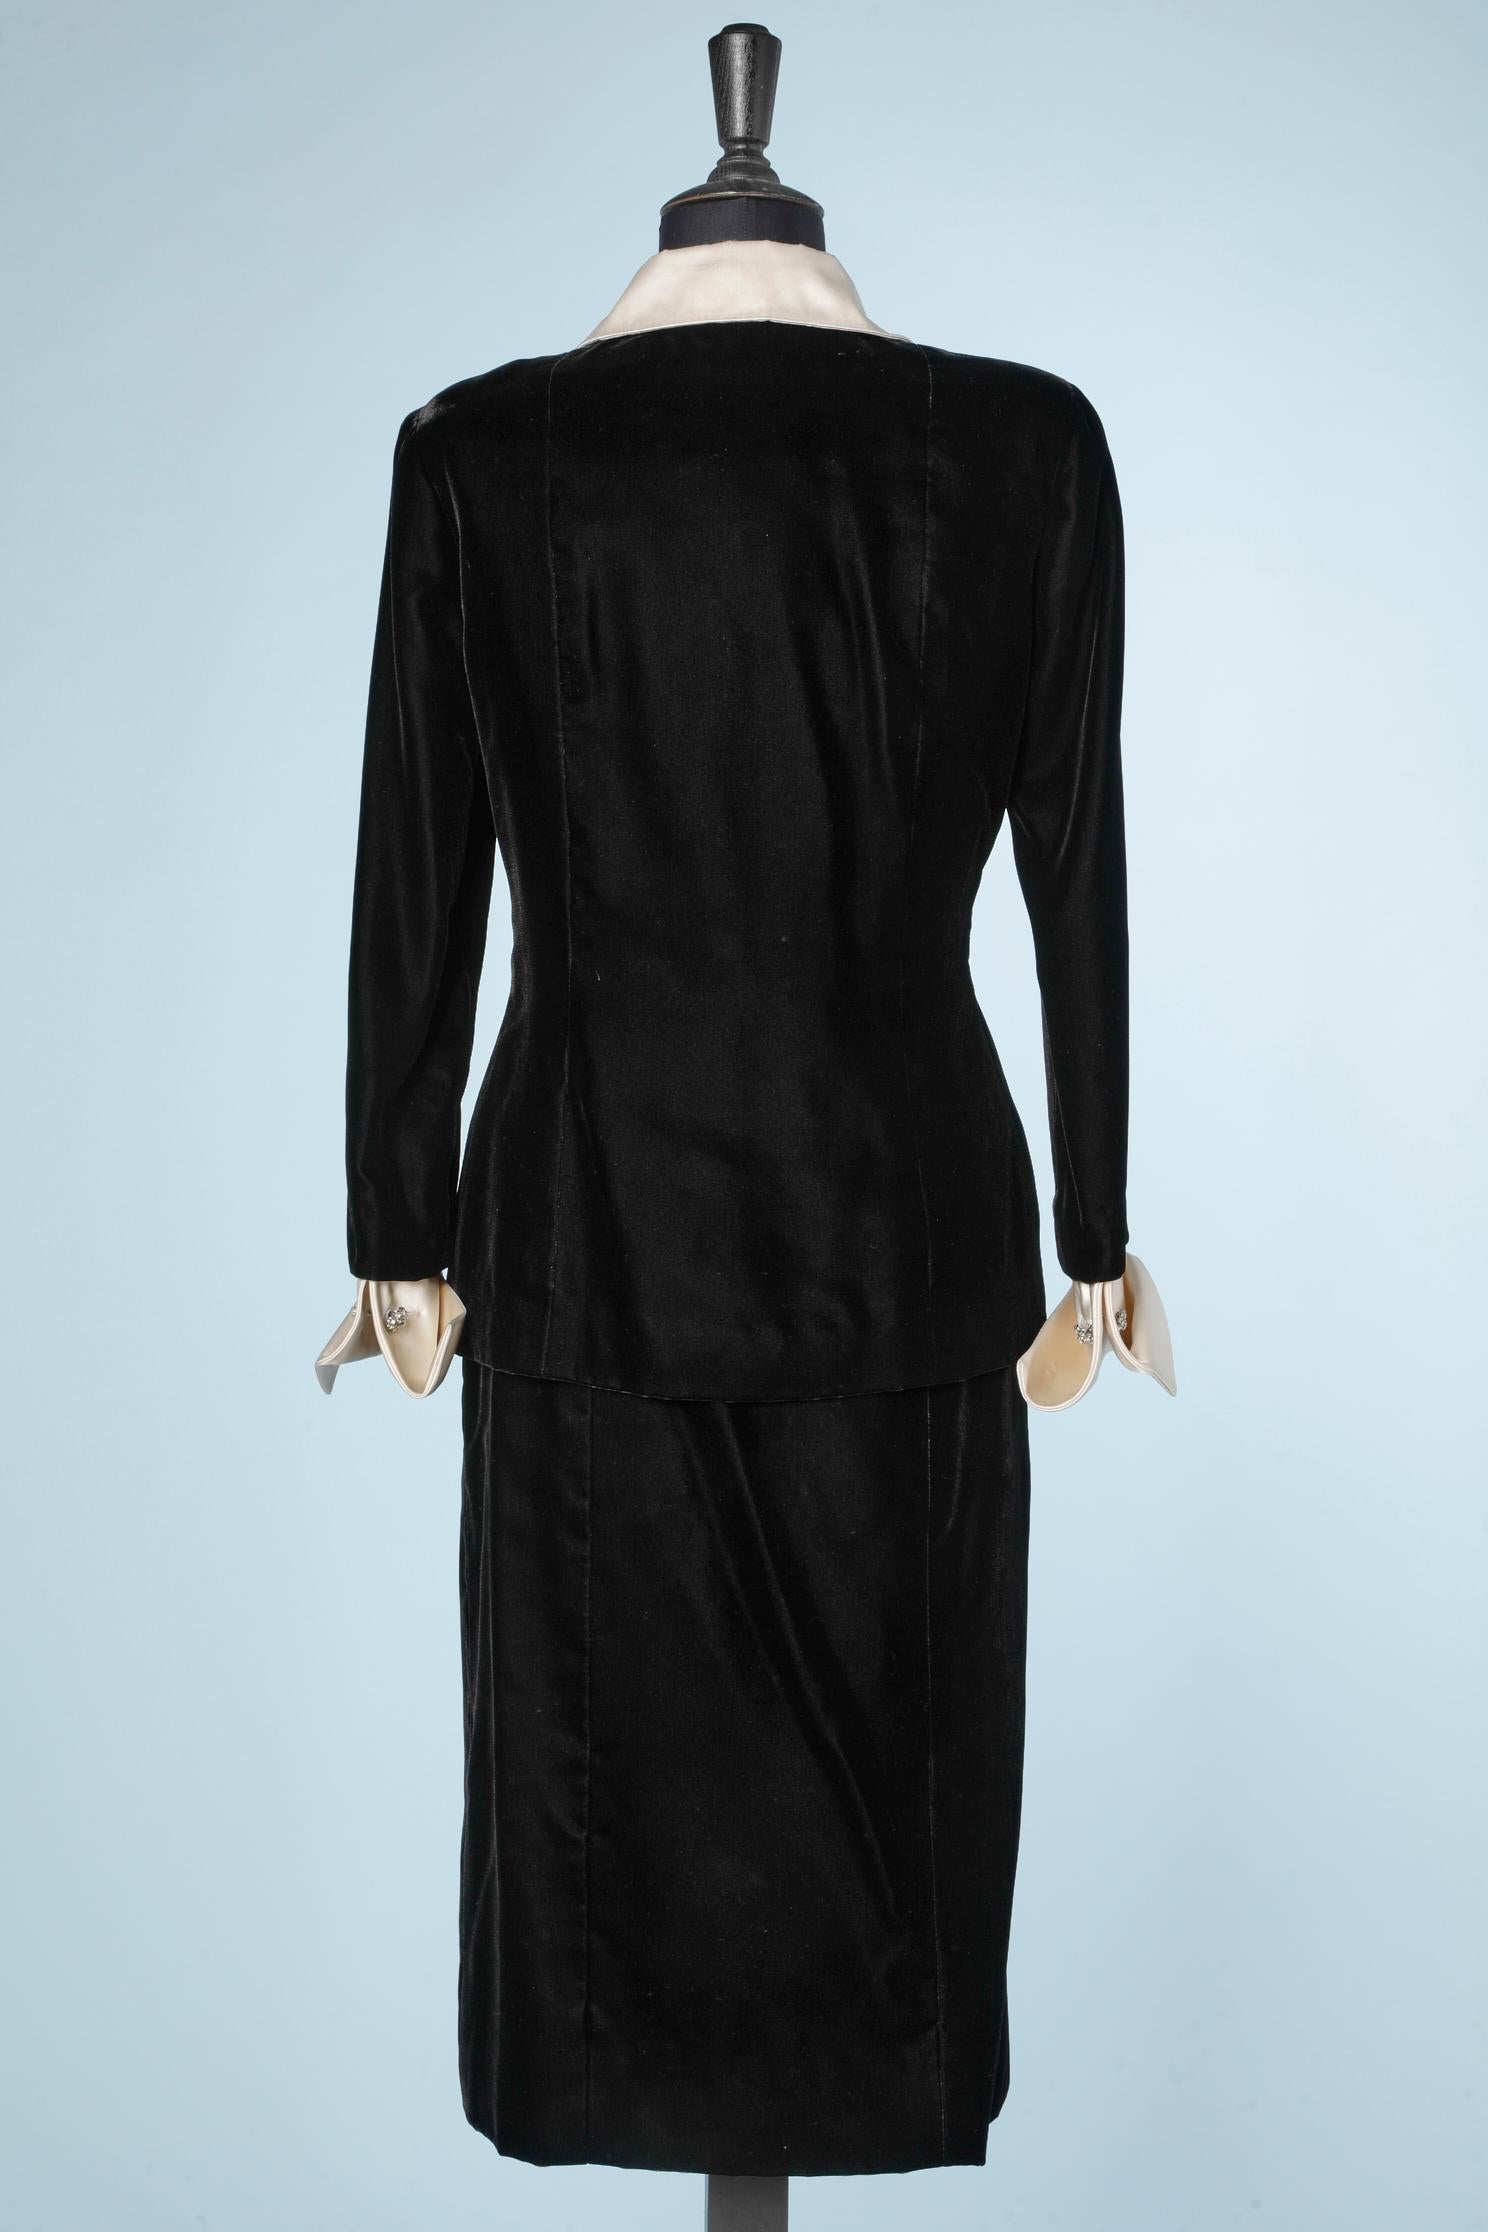 Black velvet skirt-suit with ivory silk collar and cuff Chanel Boutique  For Sale 4